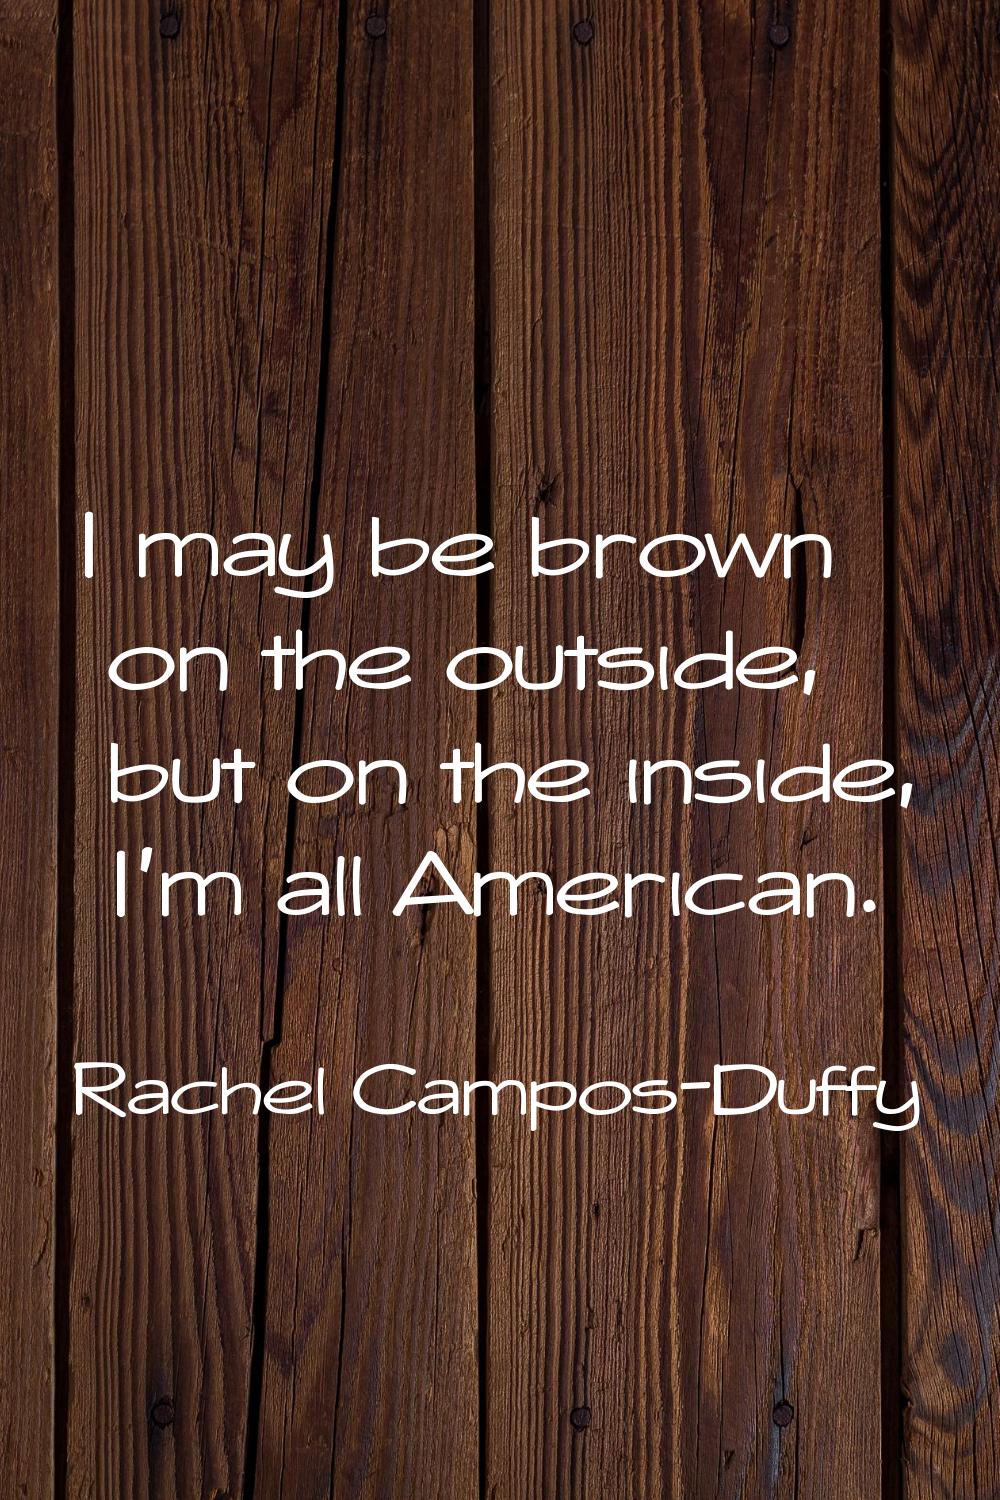 I may be brown on the outside, but on the inside, I'm all American.